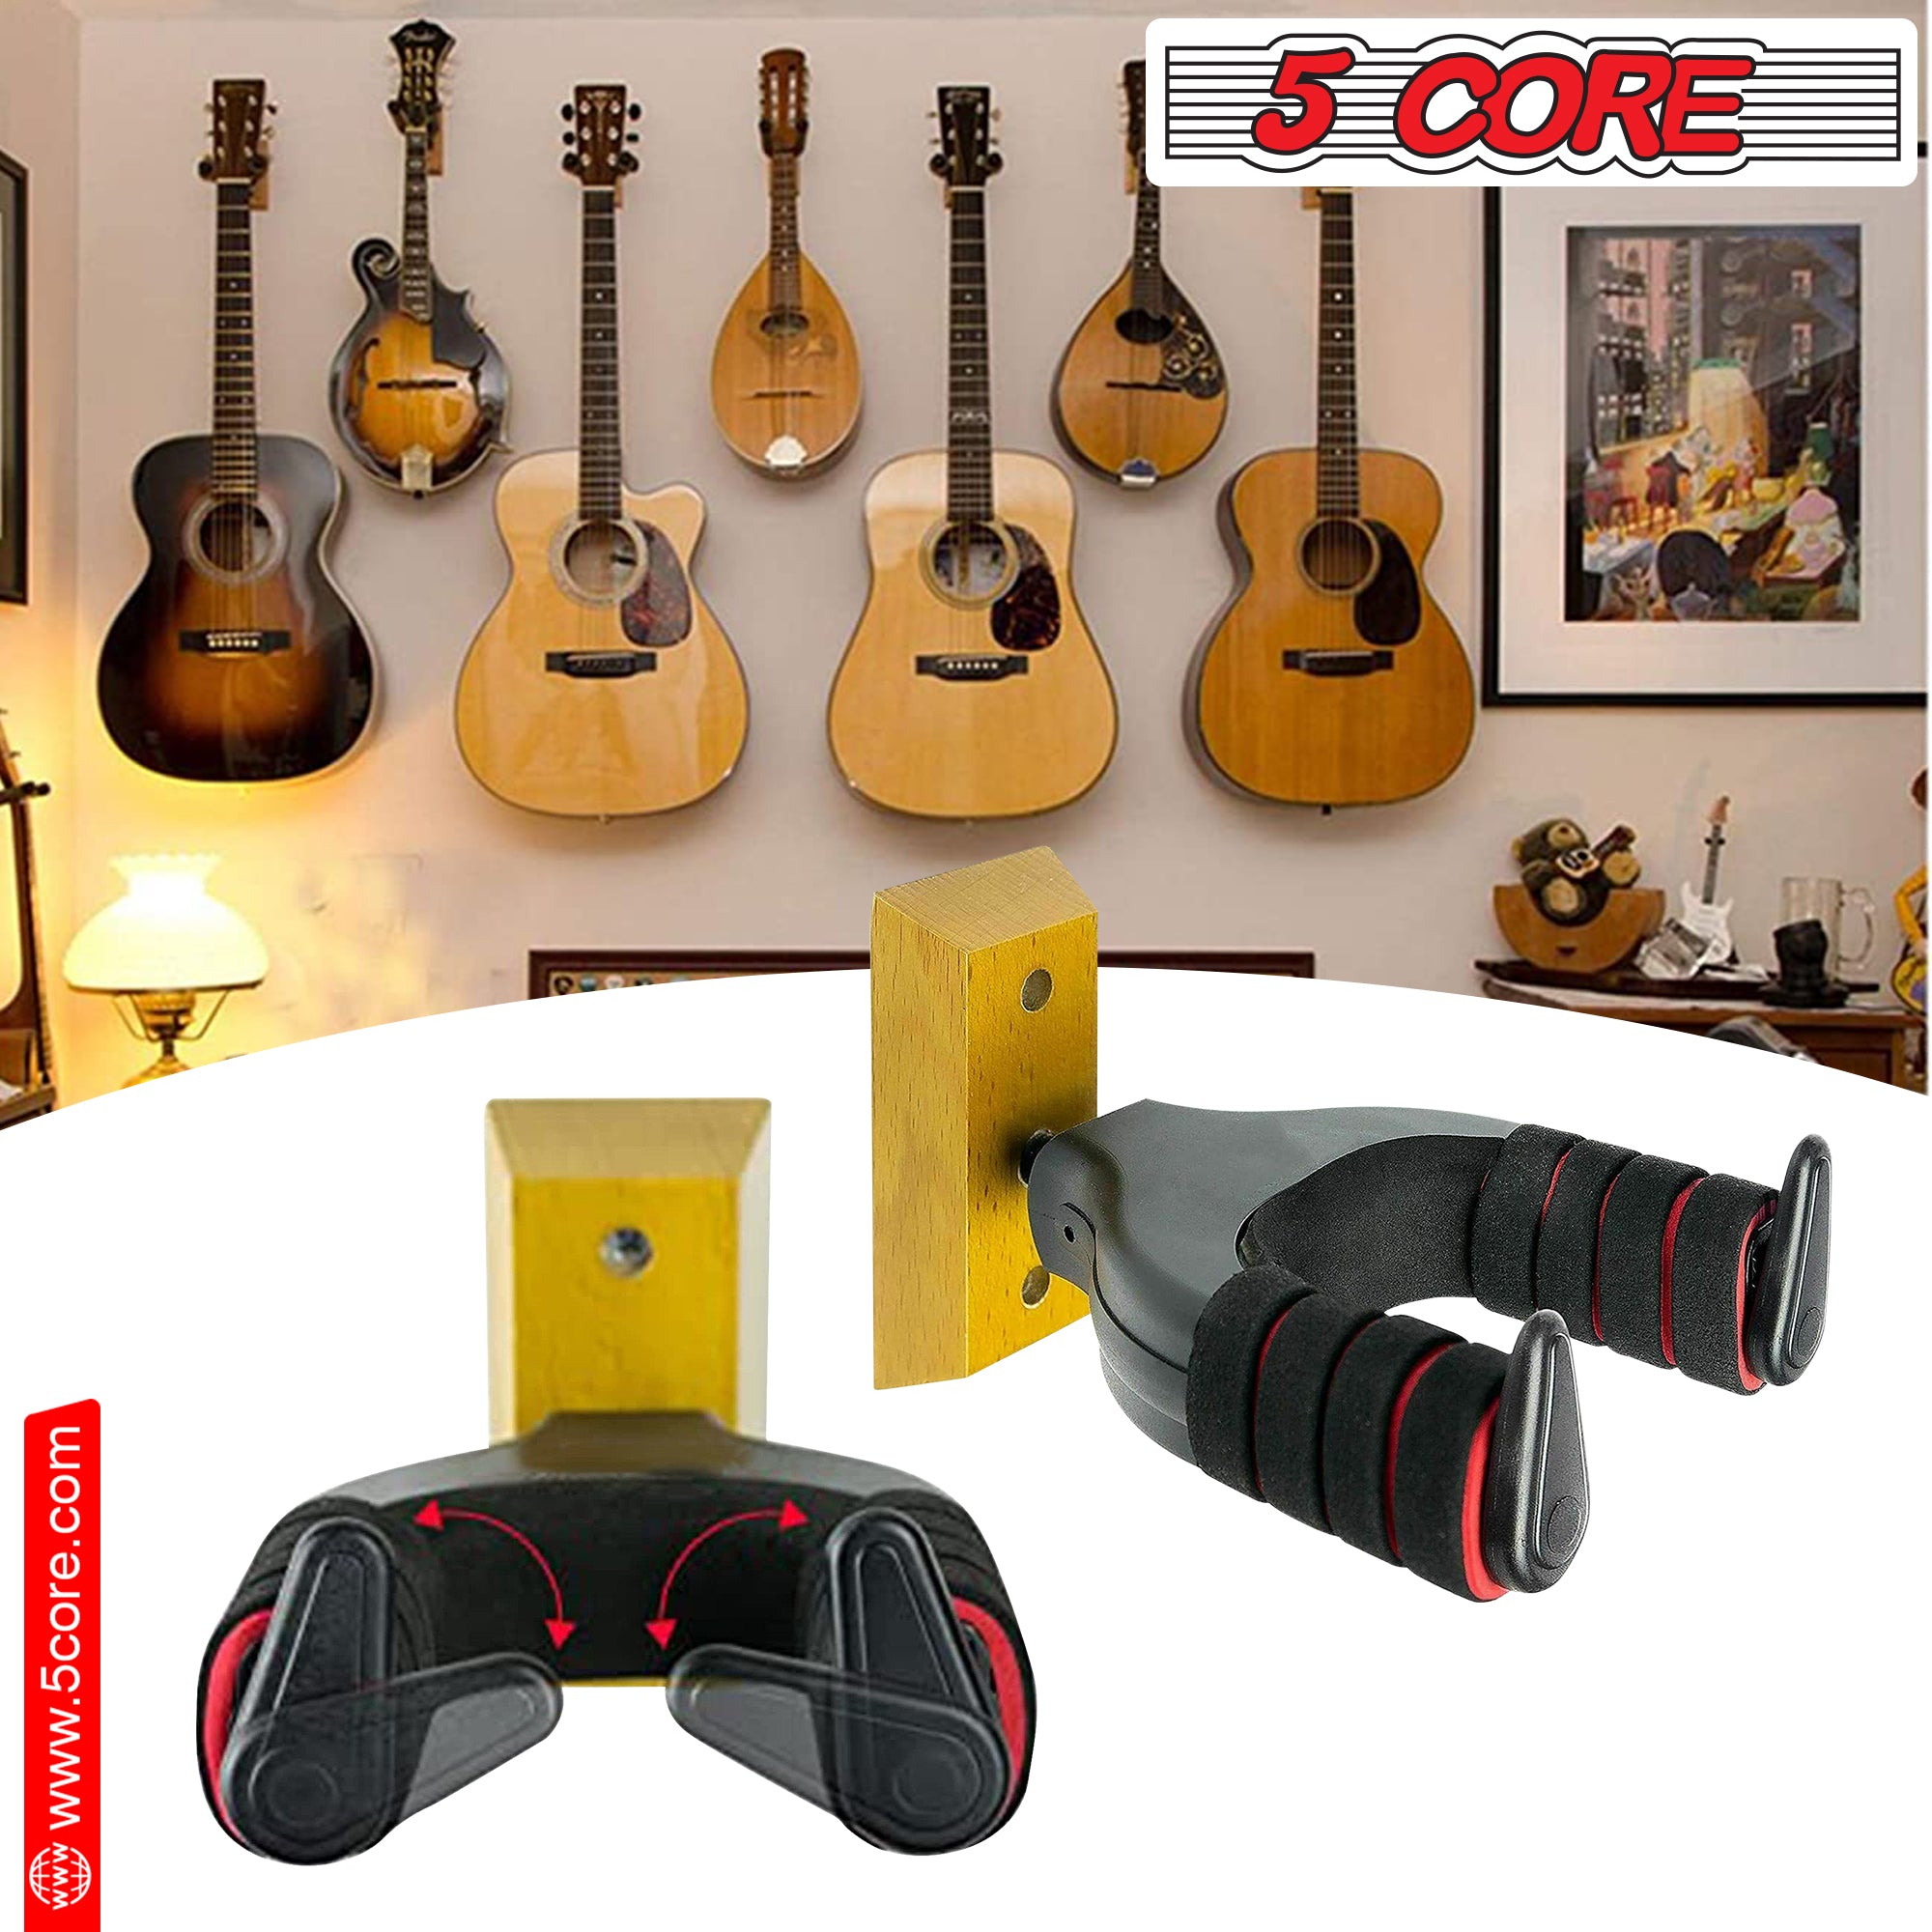 5Core Guitar Wall Mount Hanger Adjustable Rotatable Guitar Wall Holder Hook w Soft Padding